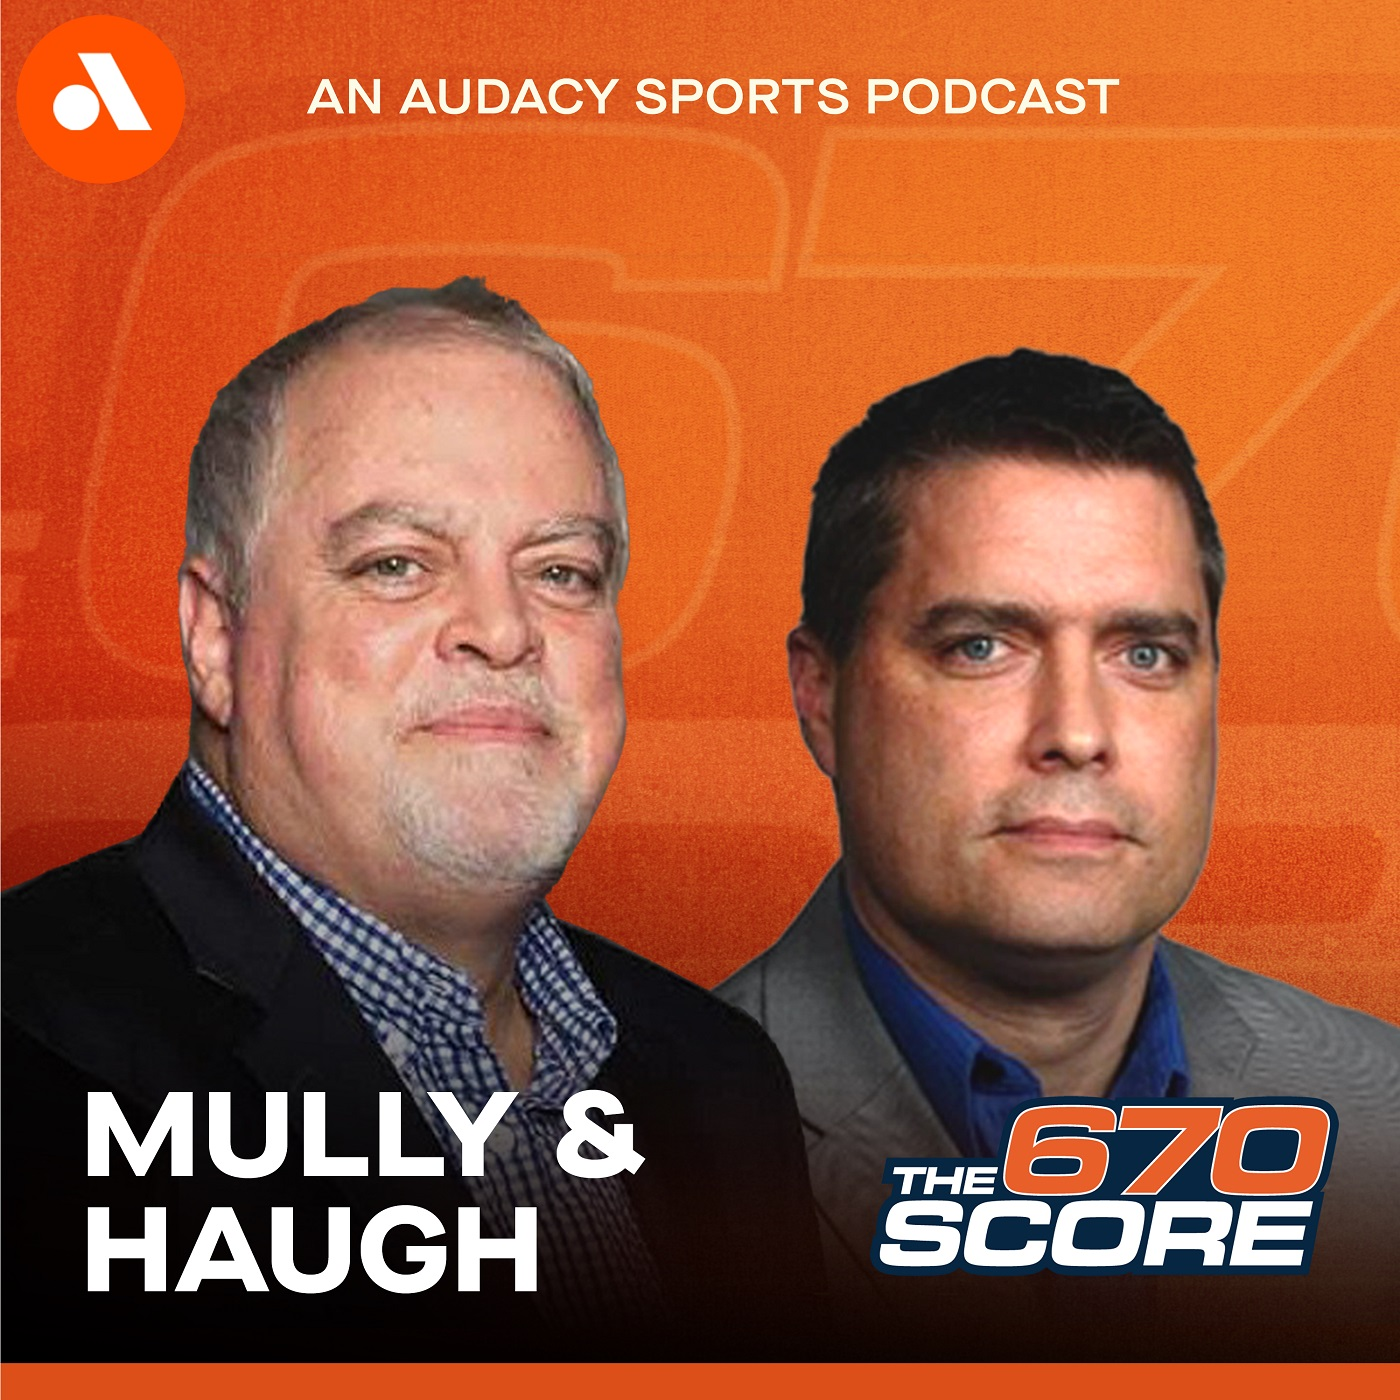 Mully & Haugh: Cubs/White Sox talk, Tommy Hottovy interview (Hour 3)